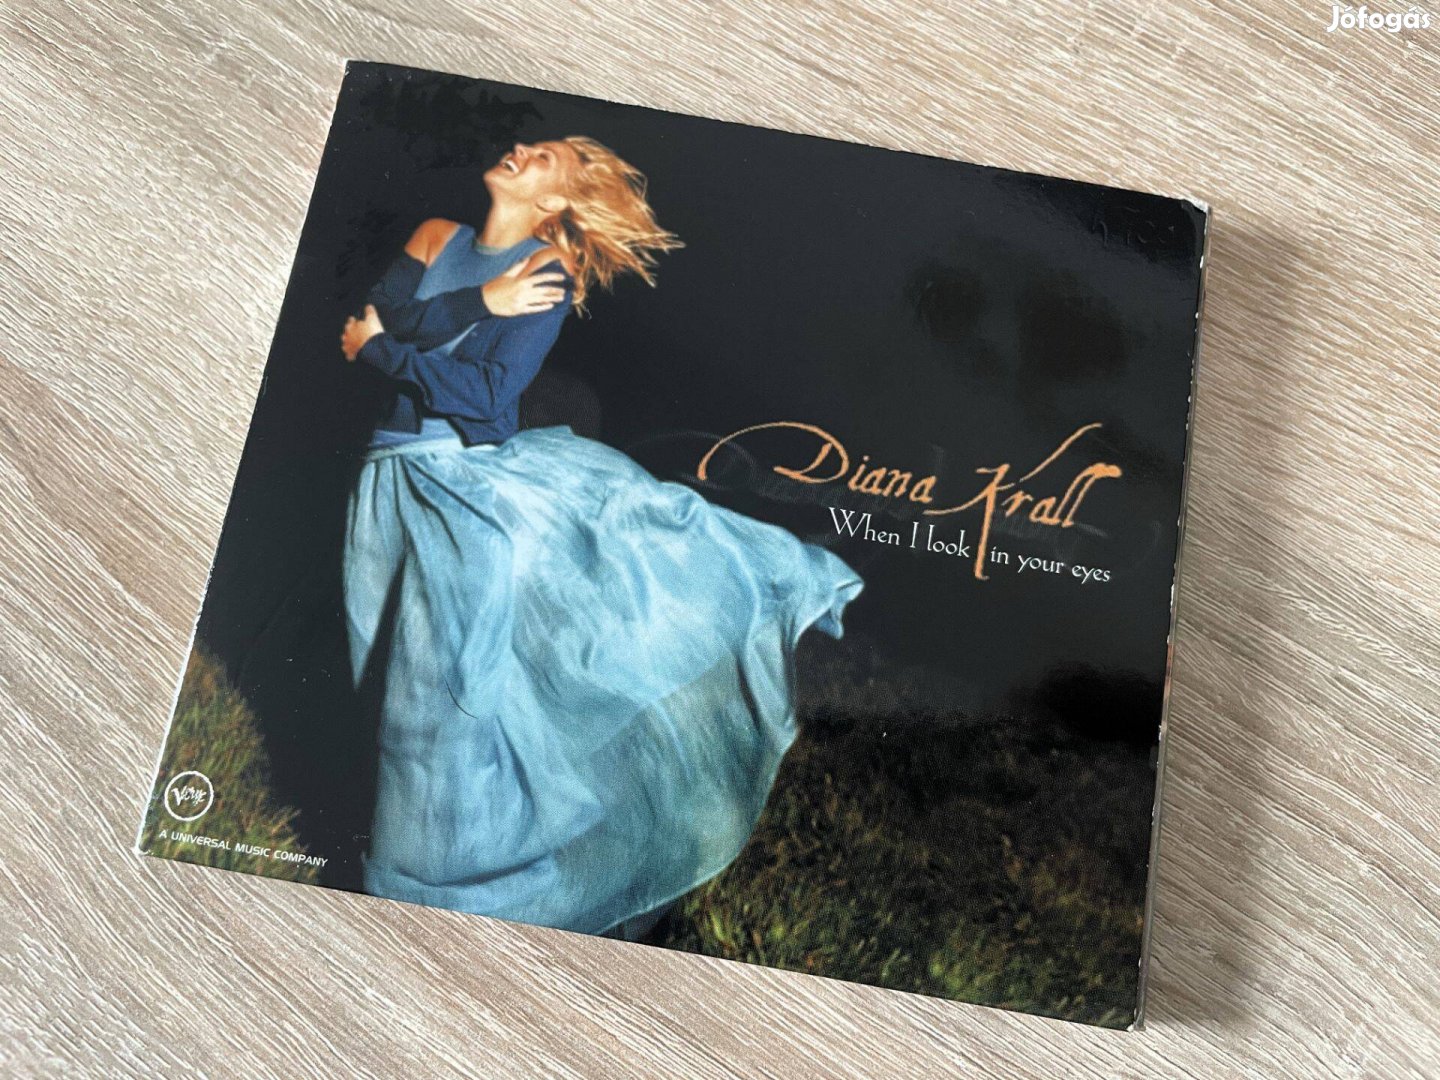 Diana Krall - When I look in your eyes (CD)